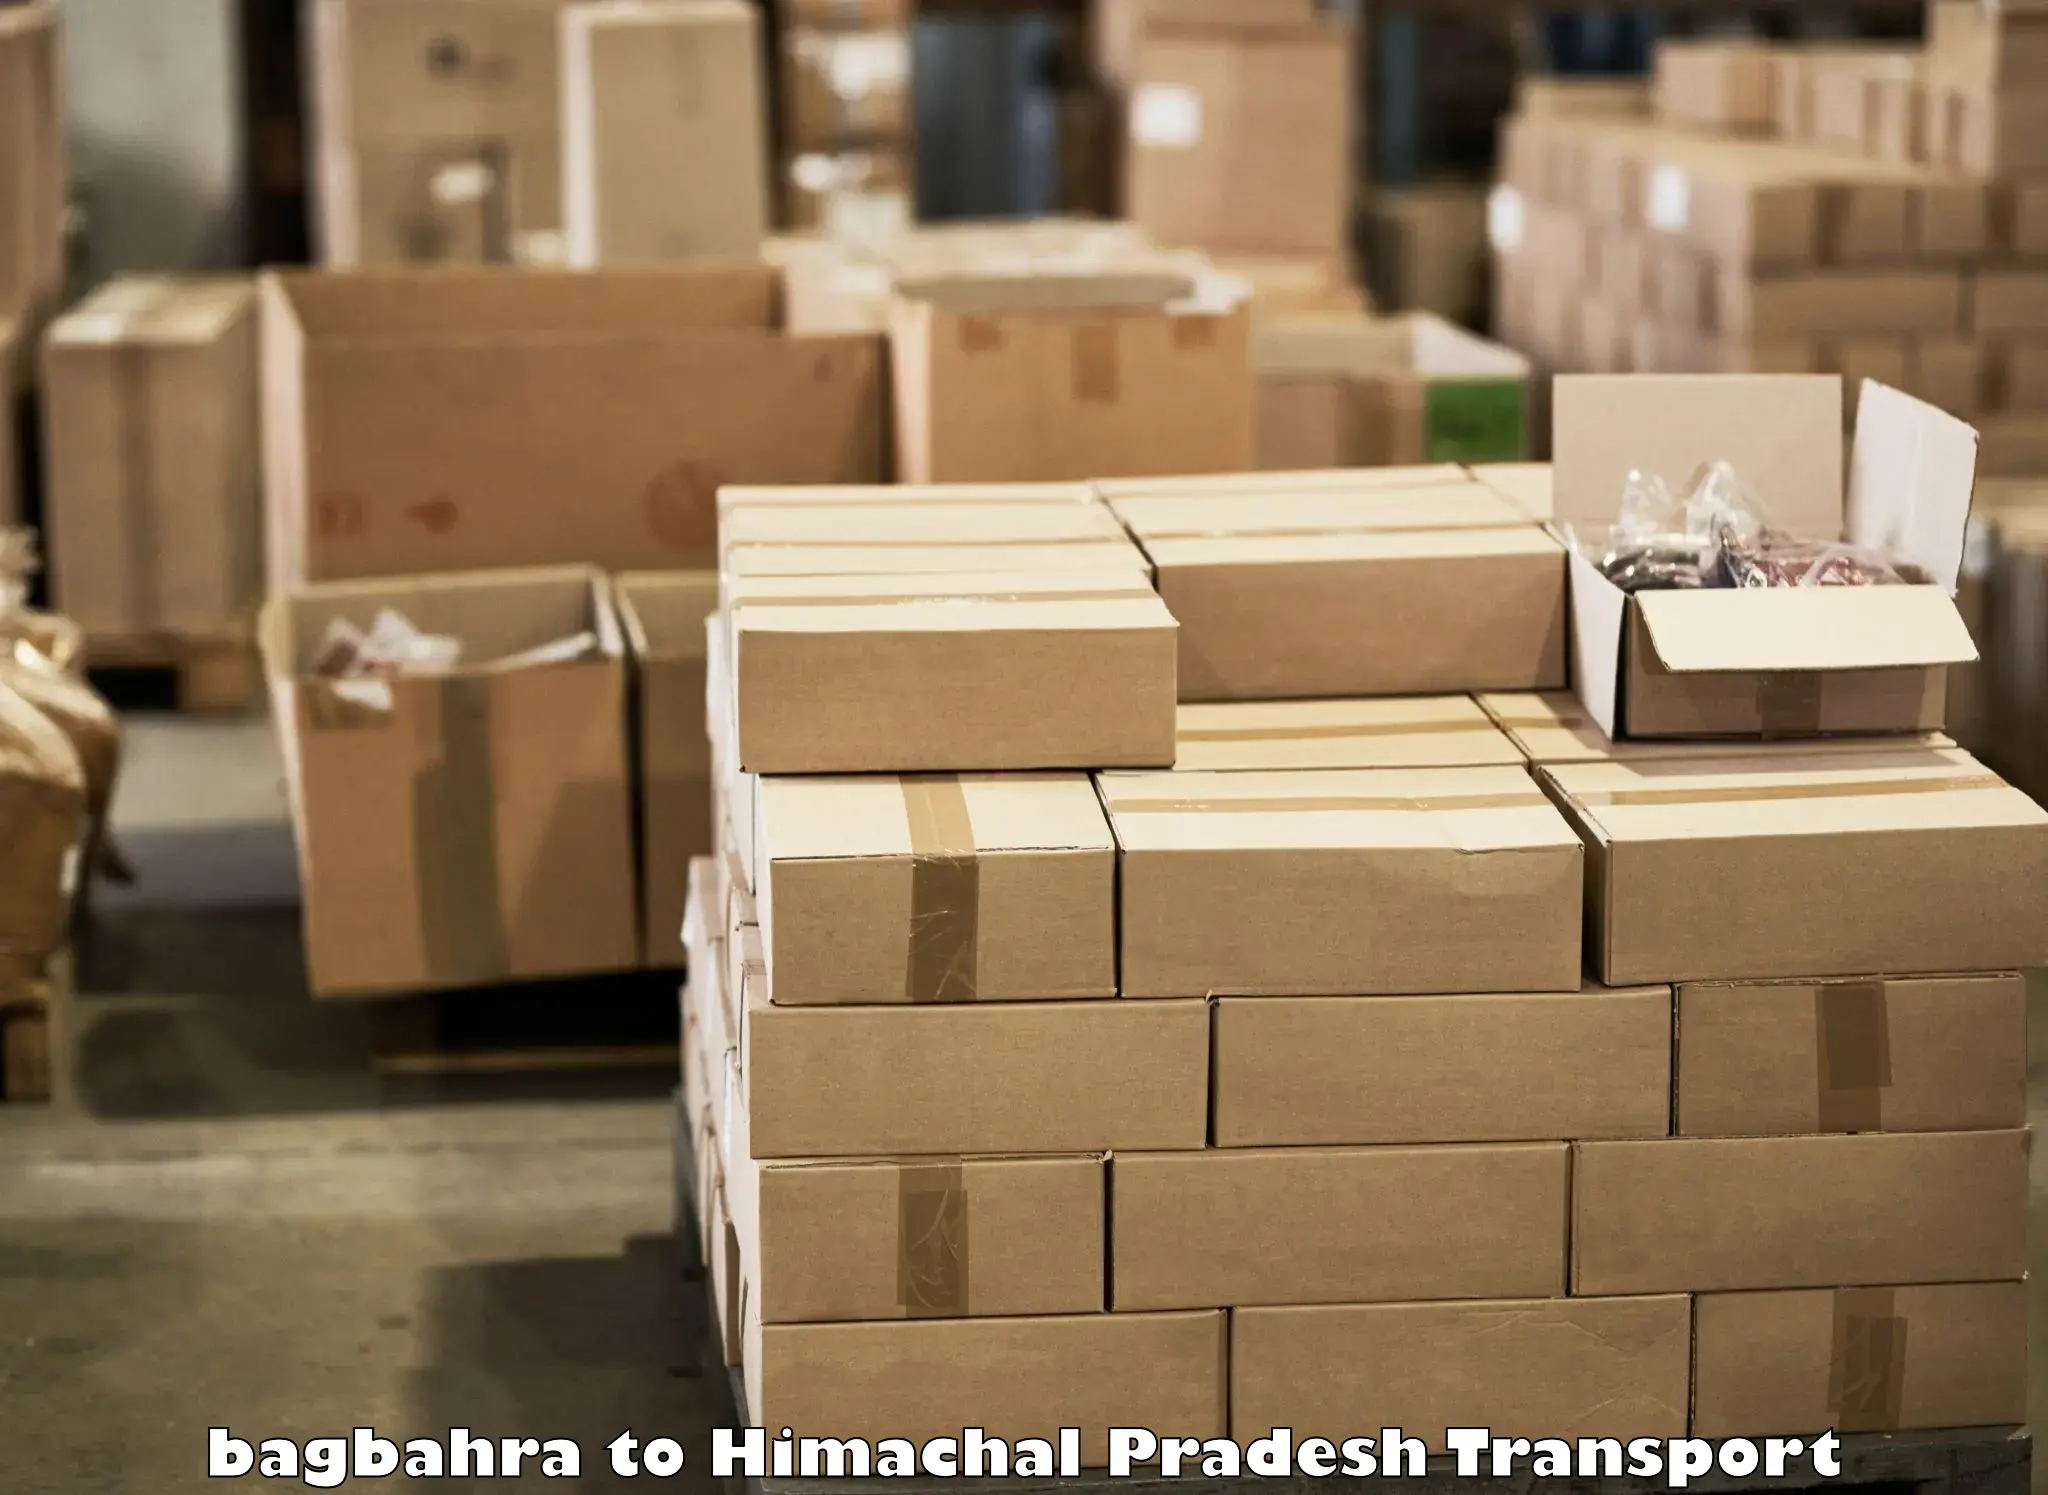 Commercial transport service bagbahra to Dharamshala